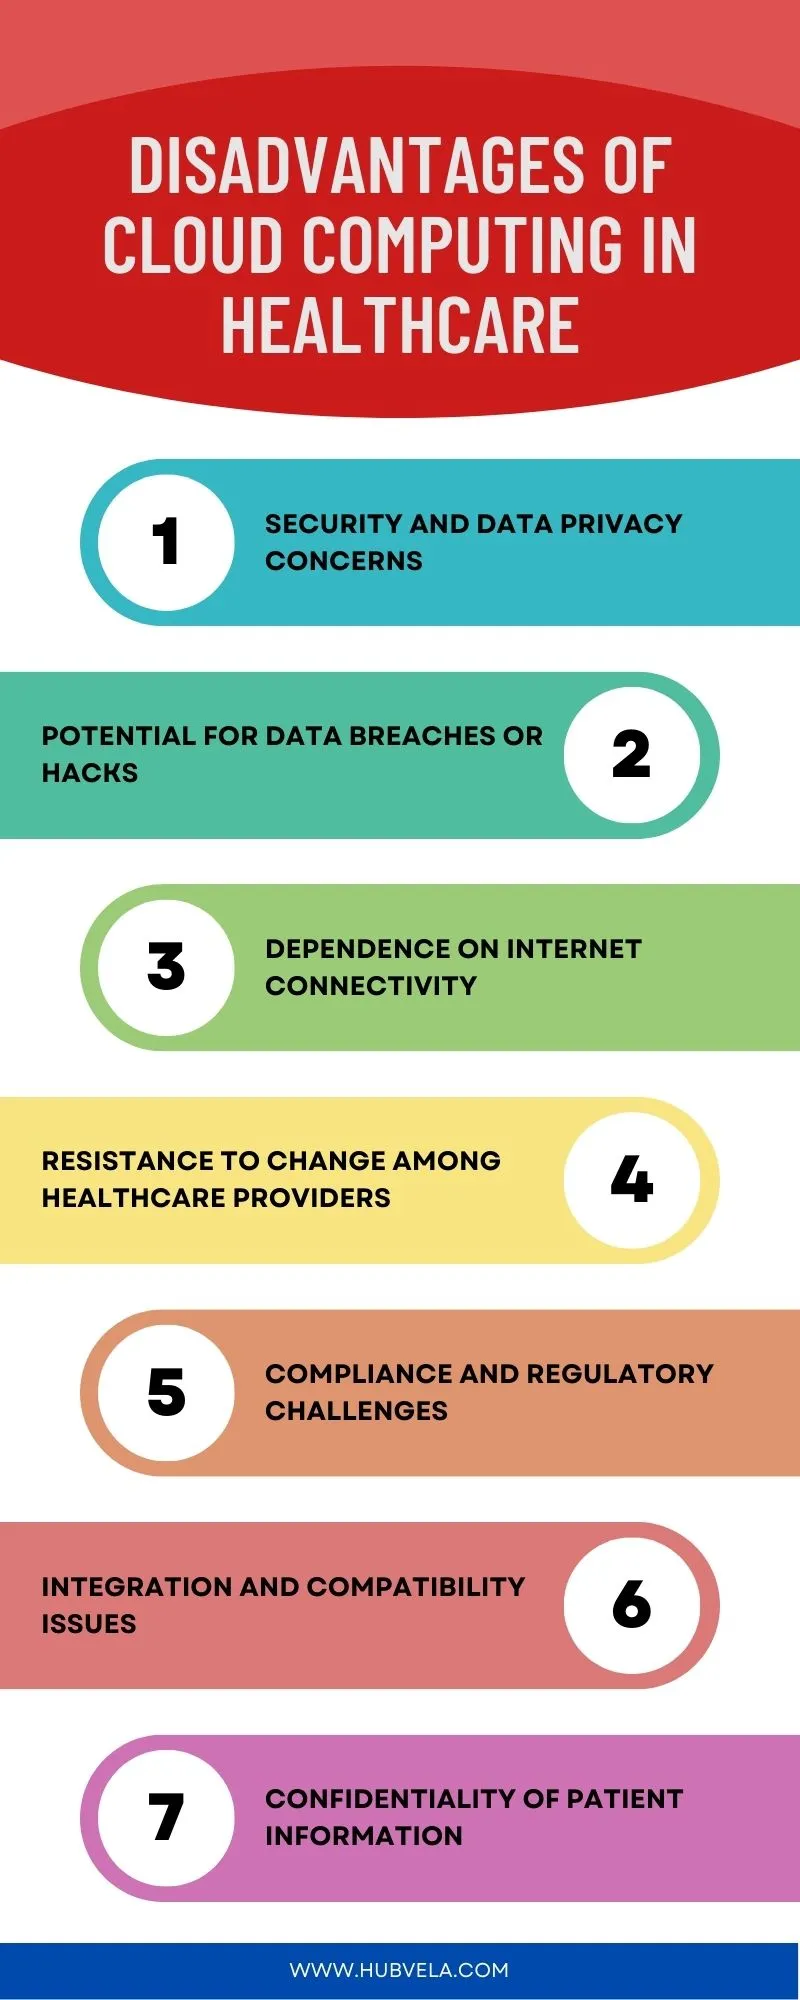 Disadvantages of Cloud Computing in Healthcare Infographic